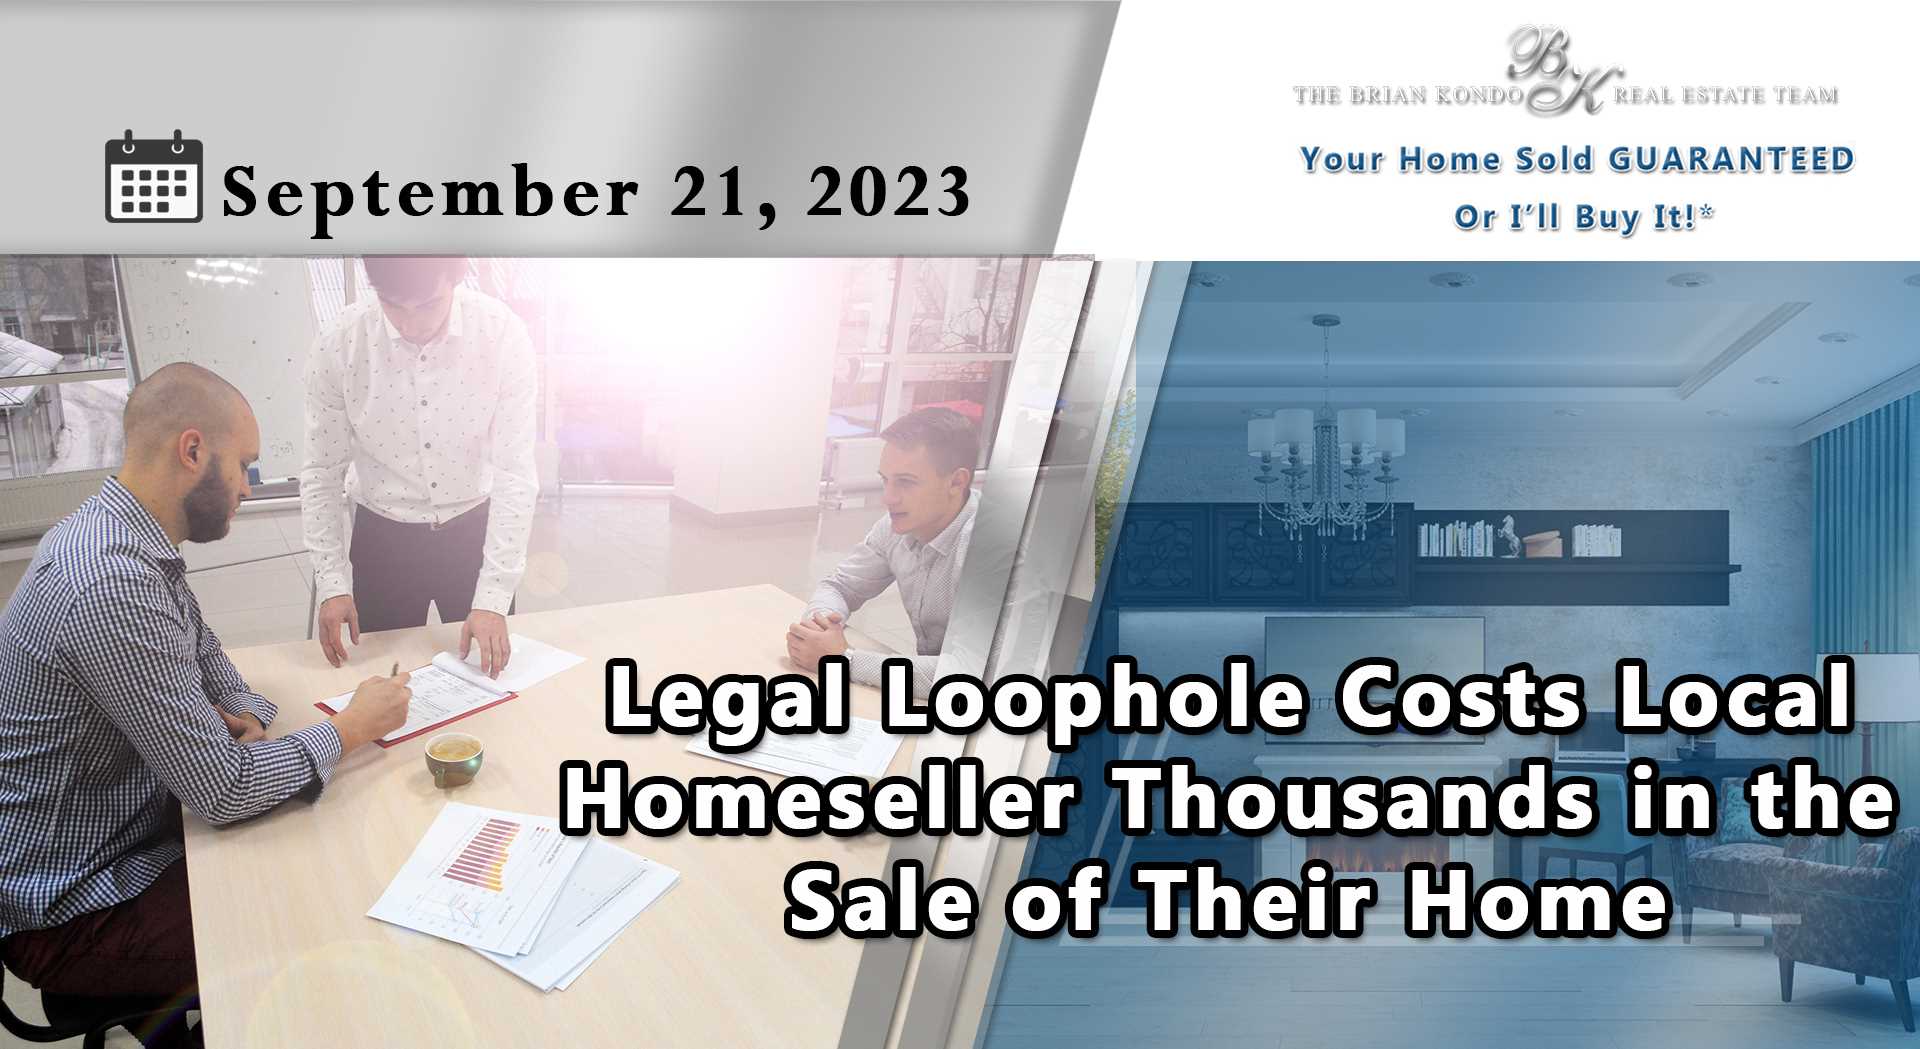 Legal Loophole Costs Local Homeseller Thousands in the Sale of Their Home